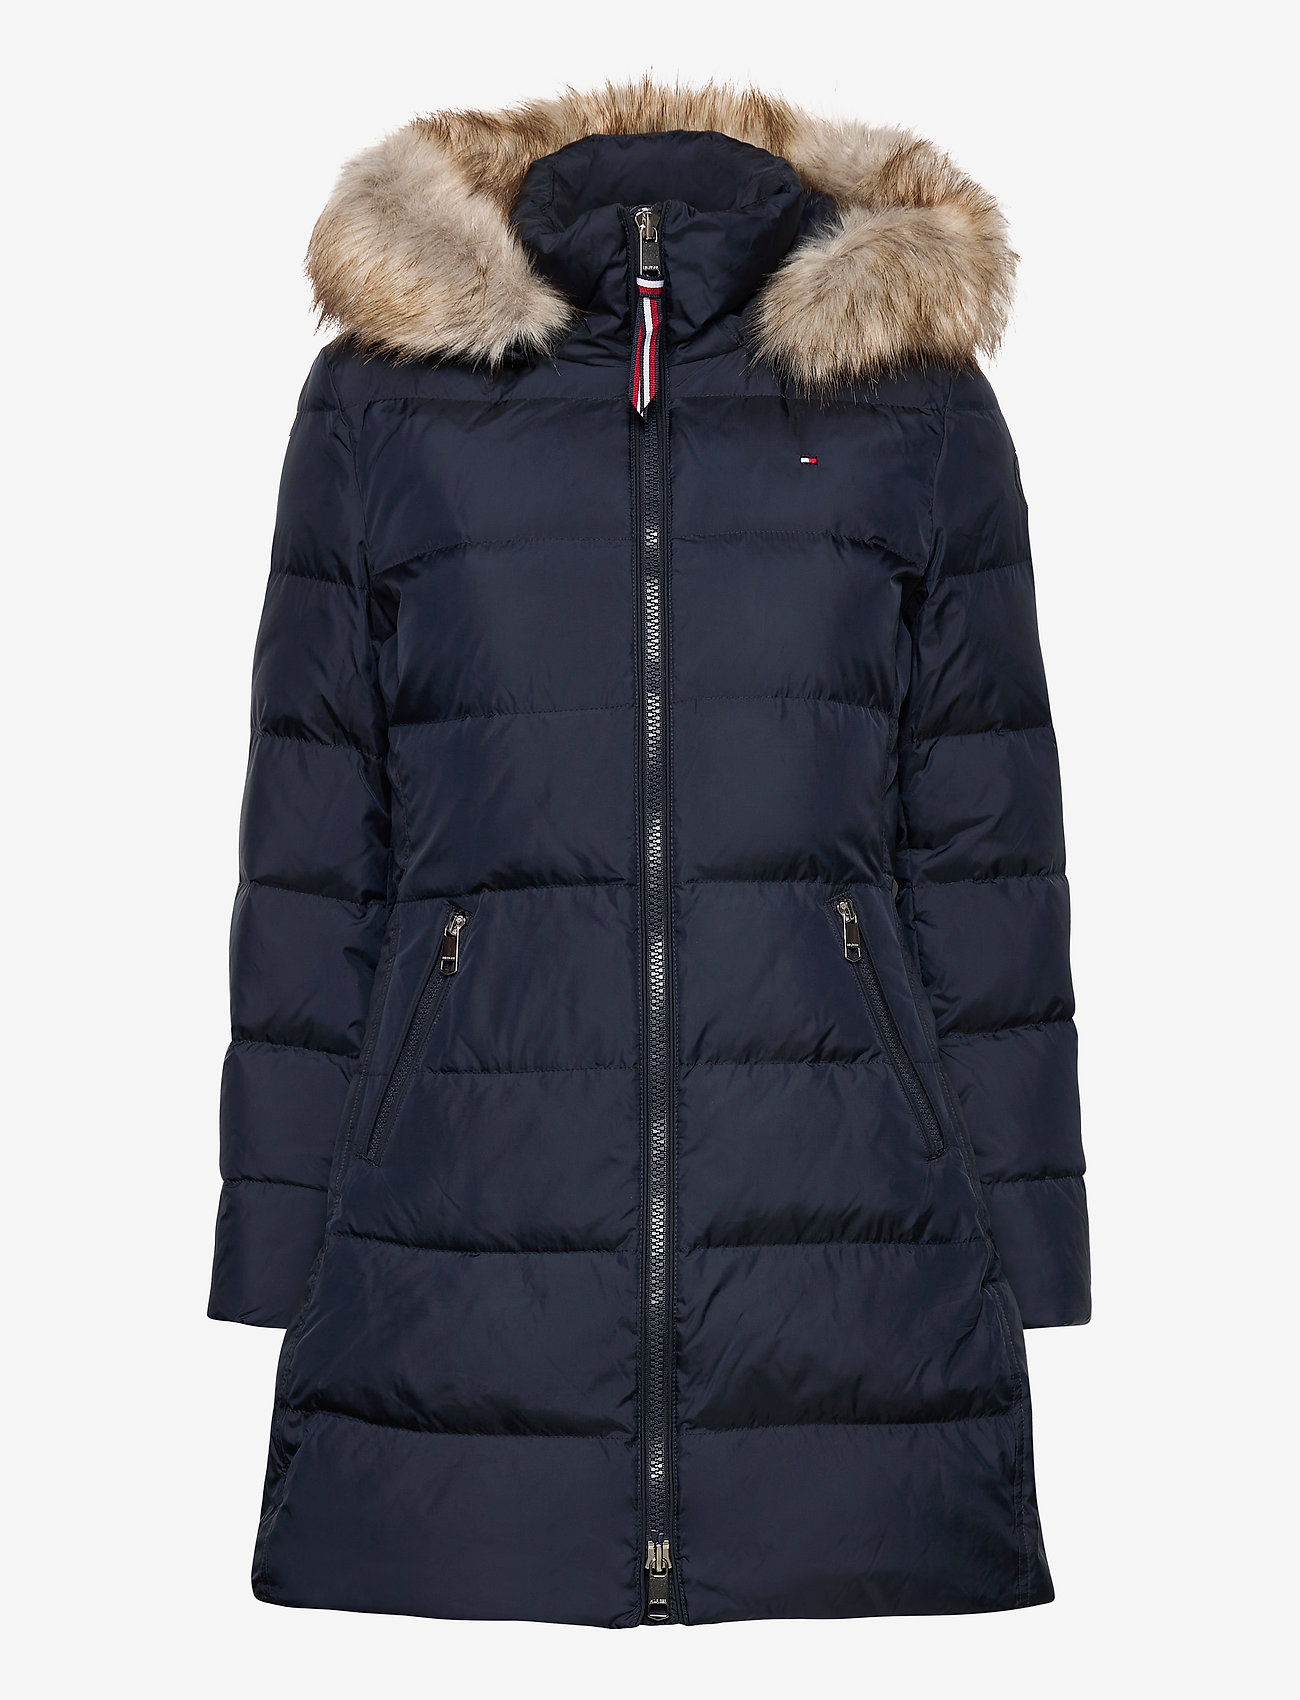 padded down jacket tommy hilfiger